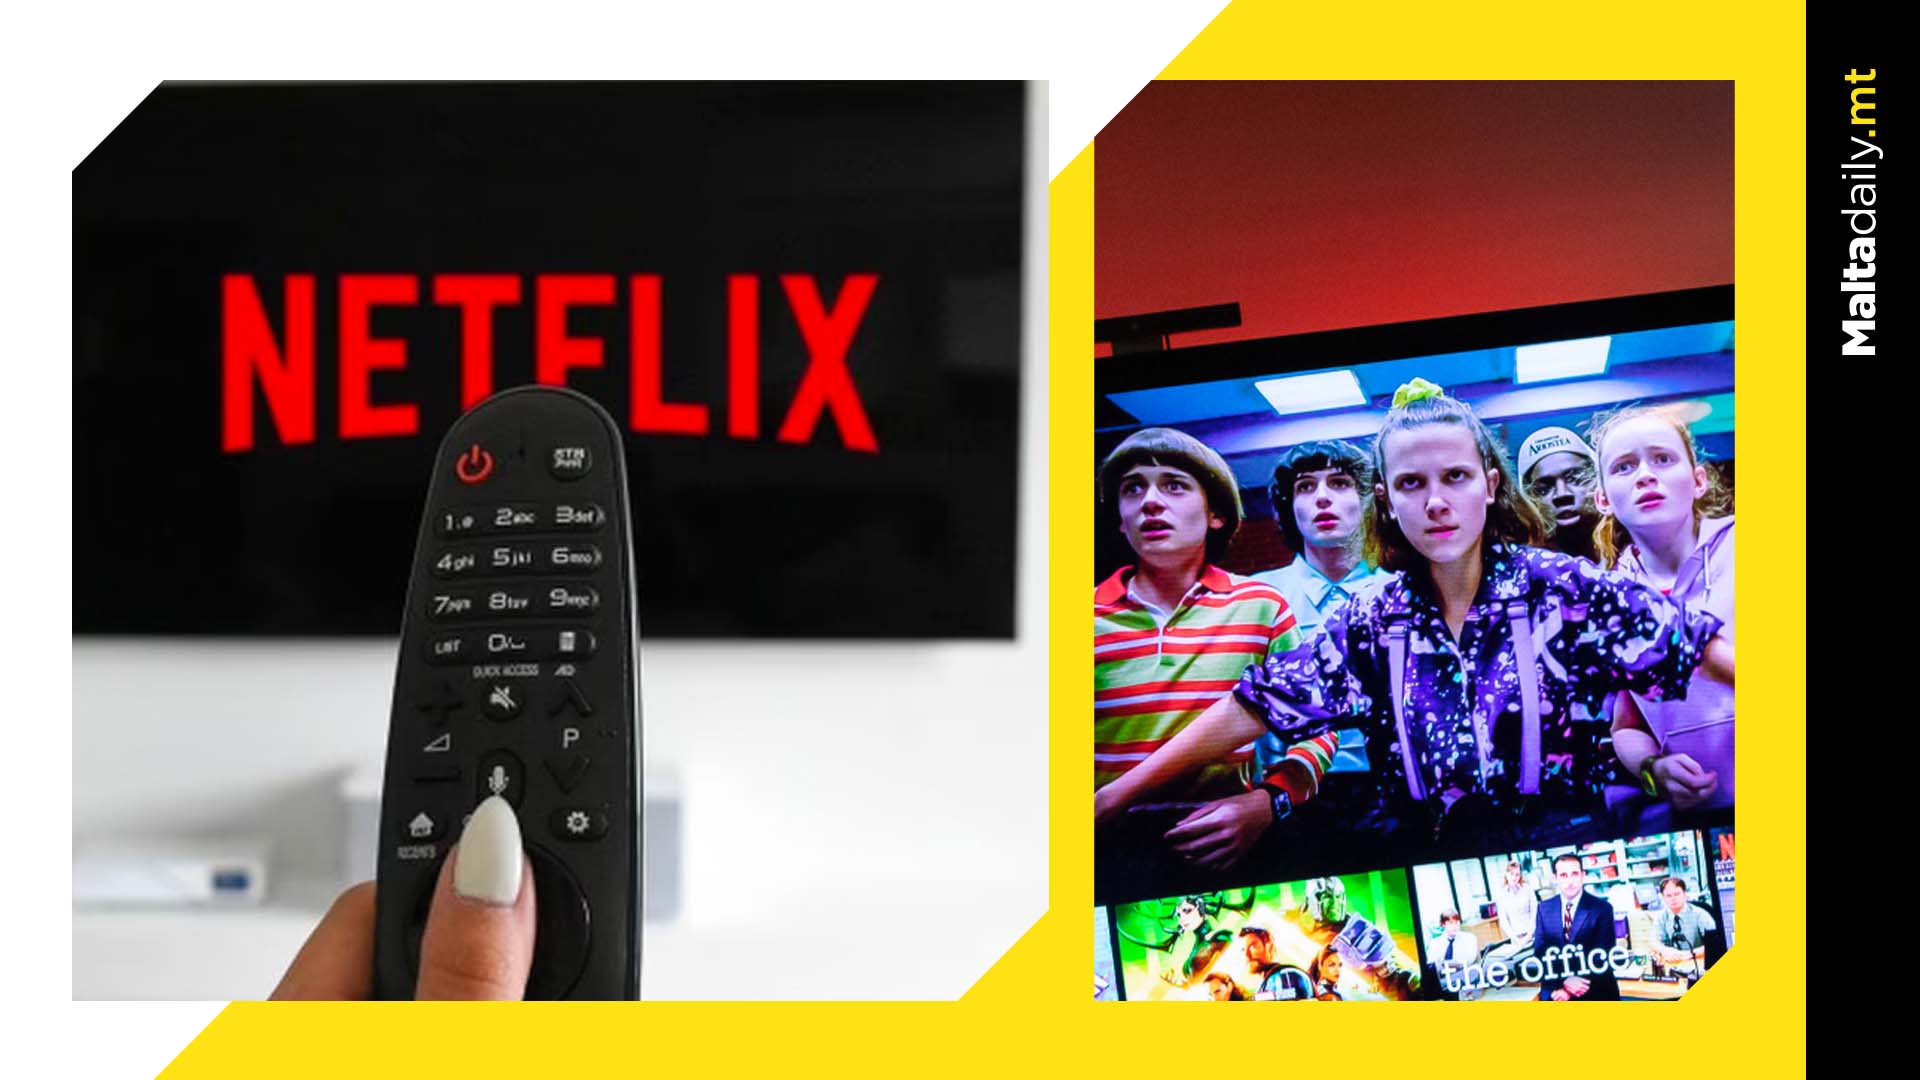 Here's what Netflix's new rules could mean for users